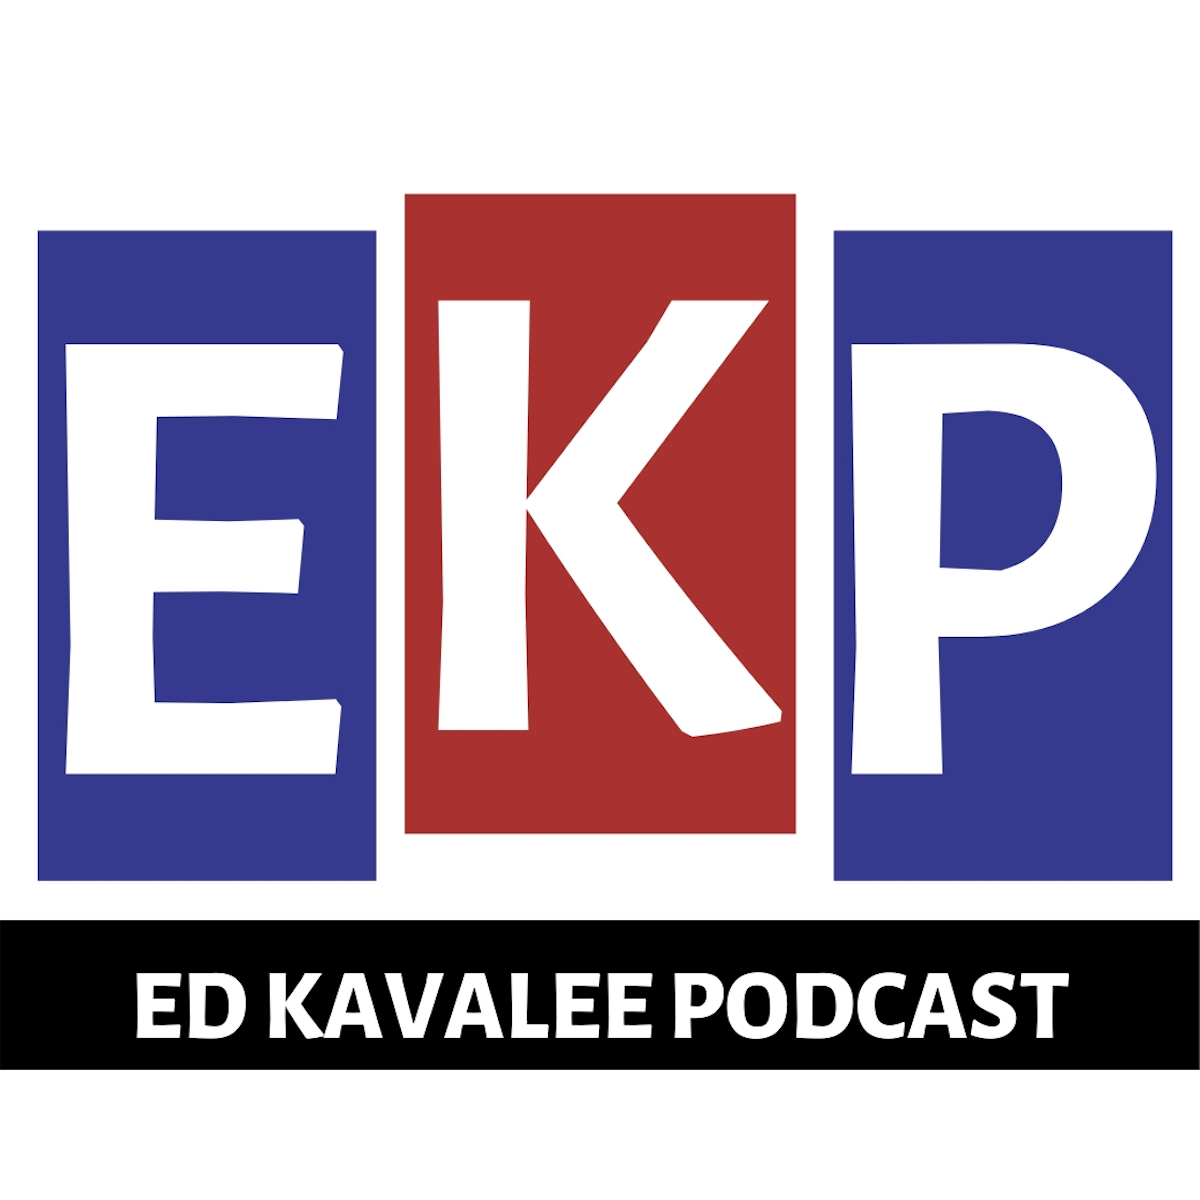 EKP: The Debut of 'Would they do that today?' with Tony Martin